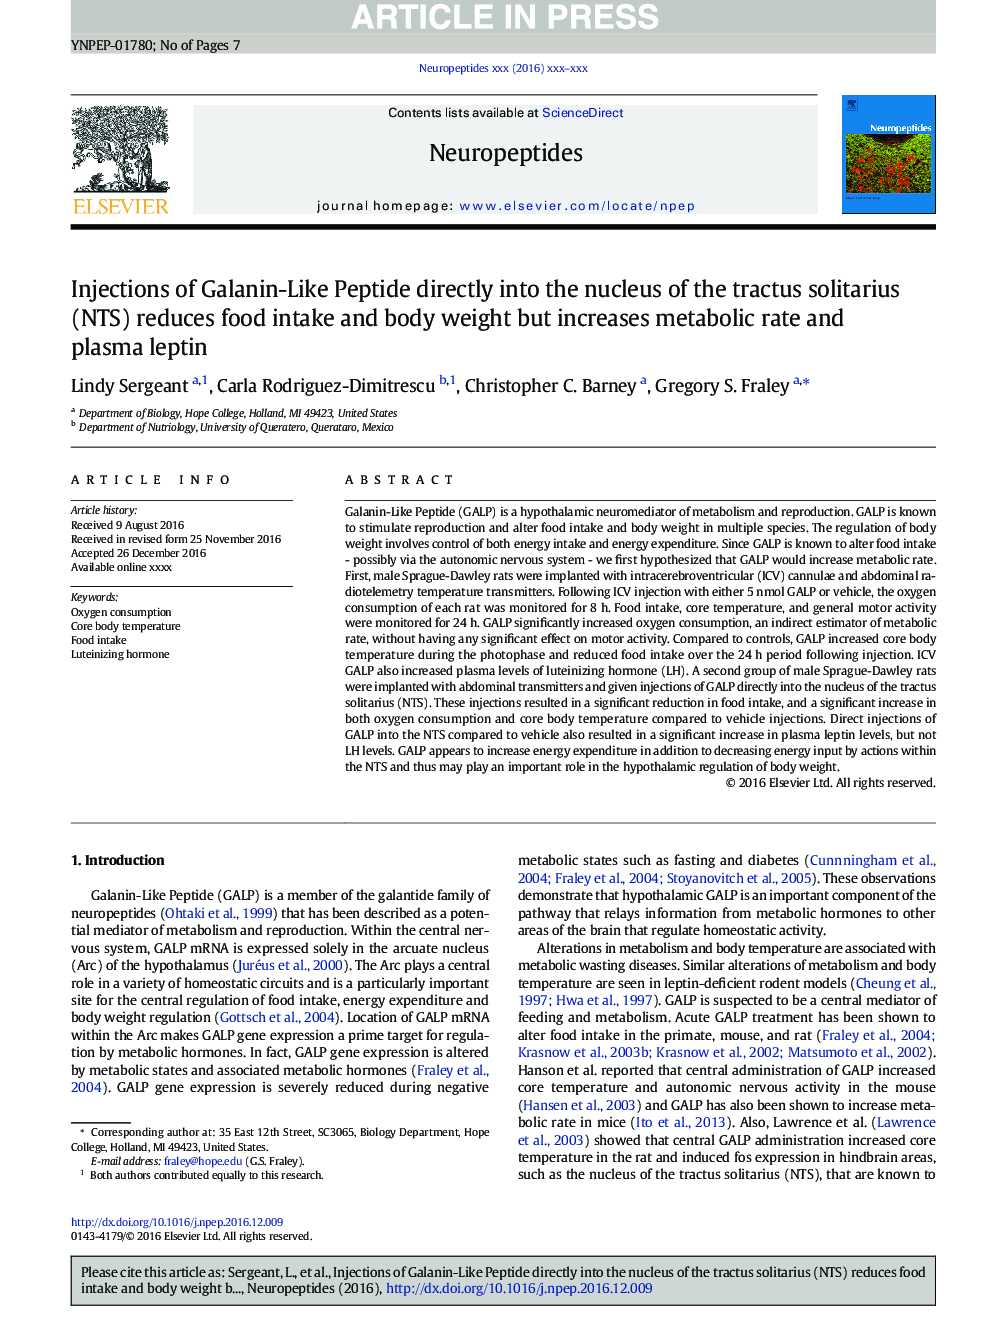 Injections of Galanin-Like Peptide directly into the nucleus of the tractus solitarius (NTS) reduces food intake and body weight but increases metabolic rate and plasma leptin